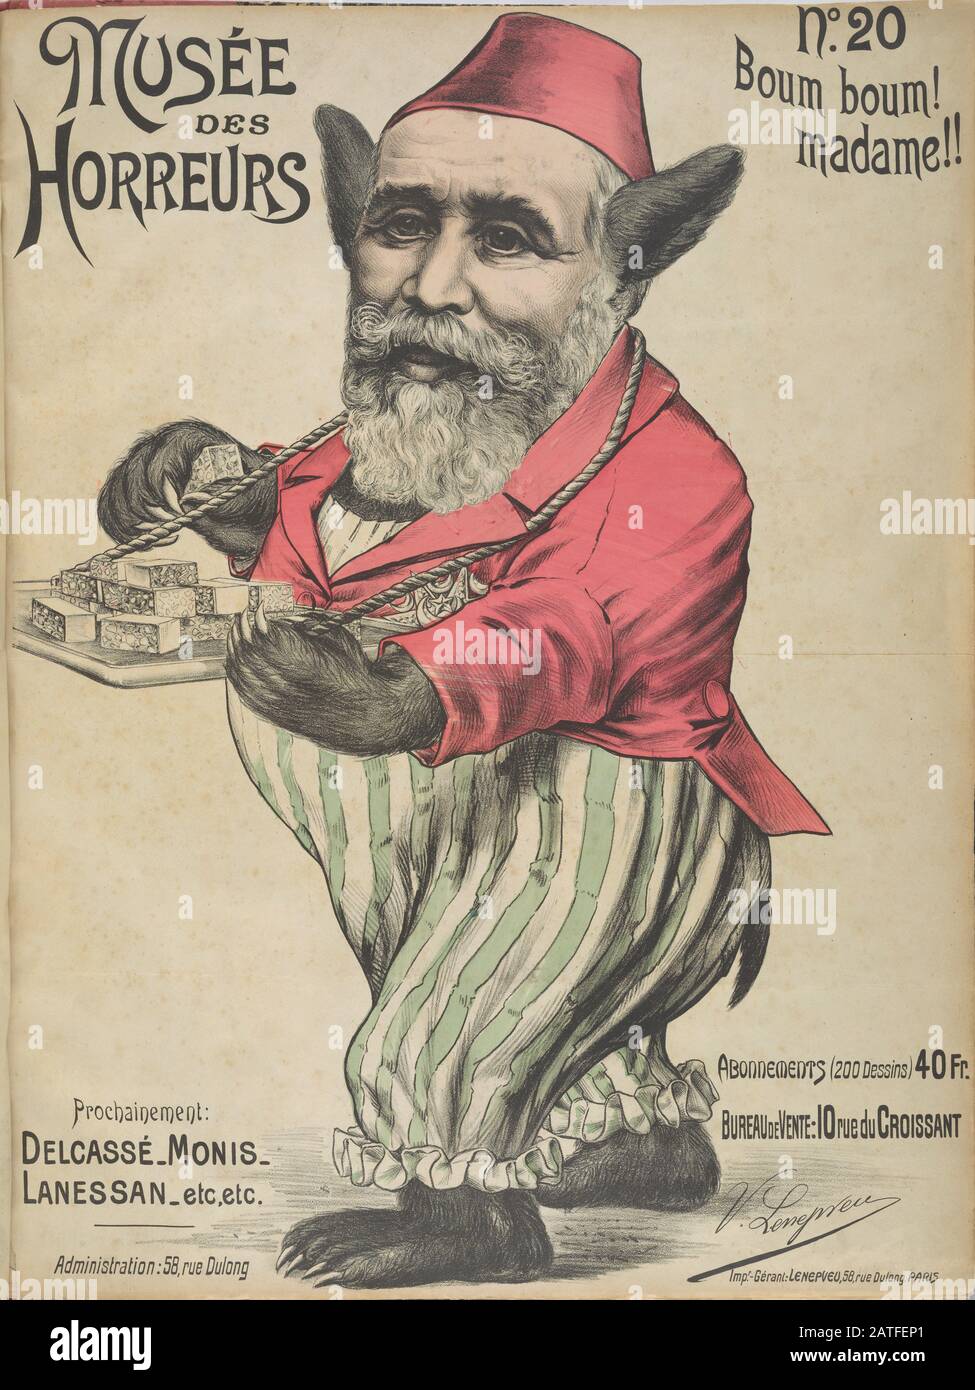 Musée des Horreurs -  No. 20 Boum boum! madame!!  -  1899  -  Lenepveu, V.  -  Caricature of Émile Loubet (1838-1929) as a creature in a clown costume selling matches. Loubet became President of France in 1899 and promoted Dreyfus' innocence, eventually remitting Dreyfus' 10-year imprisonment sentence. Hand colored. Stock Photo